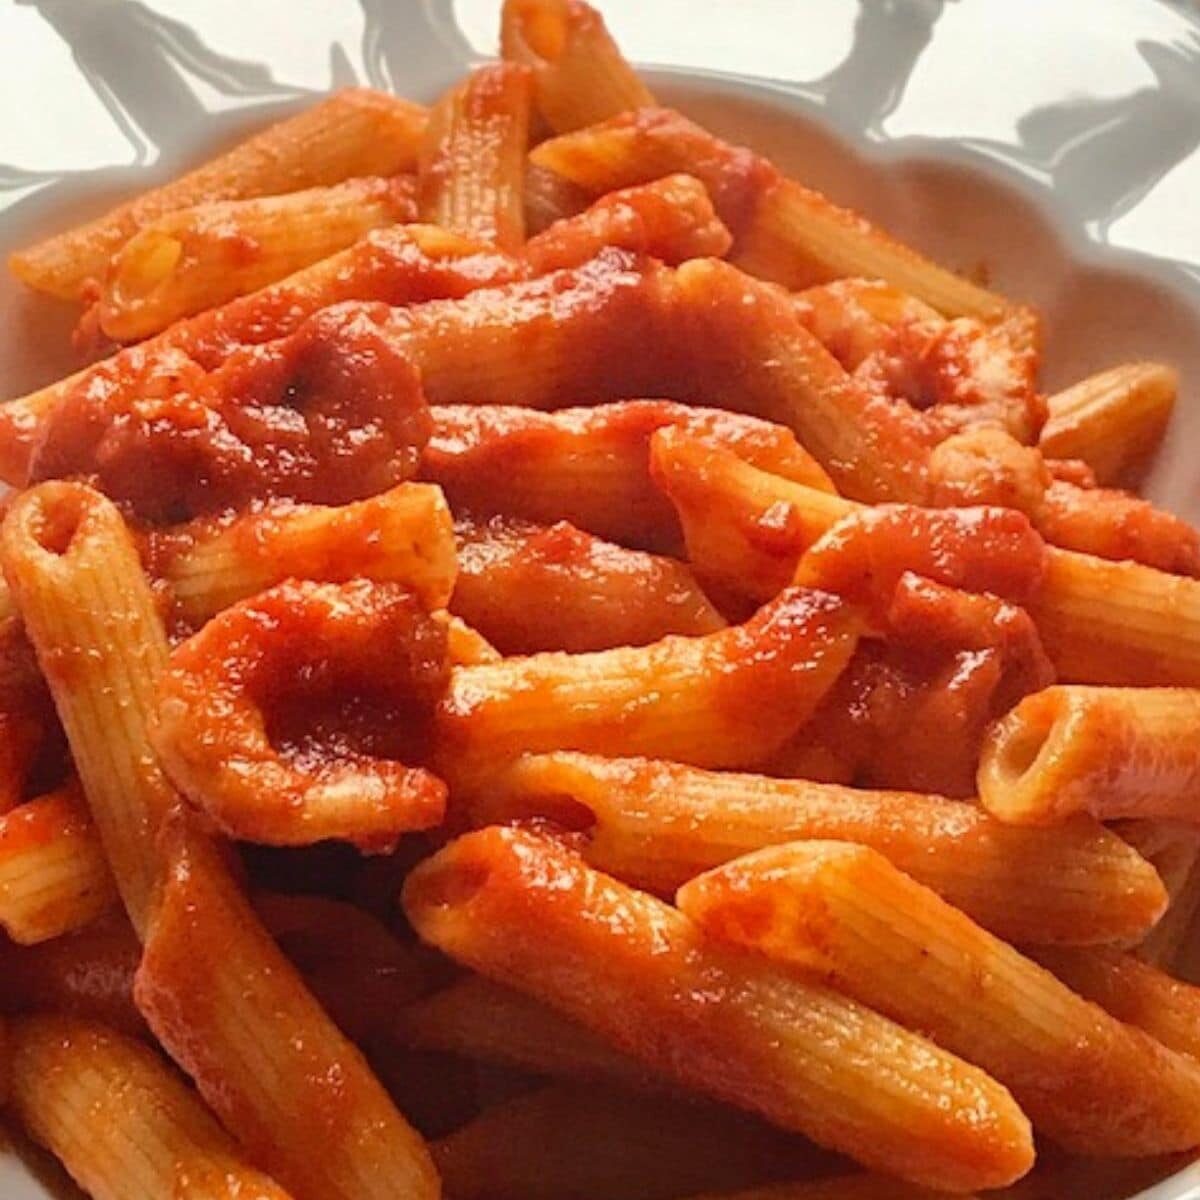 Pasta with shrimps in a tomato sauce.